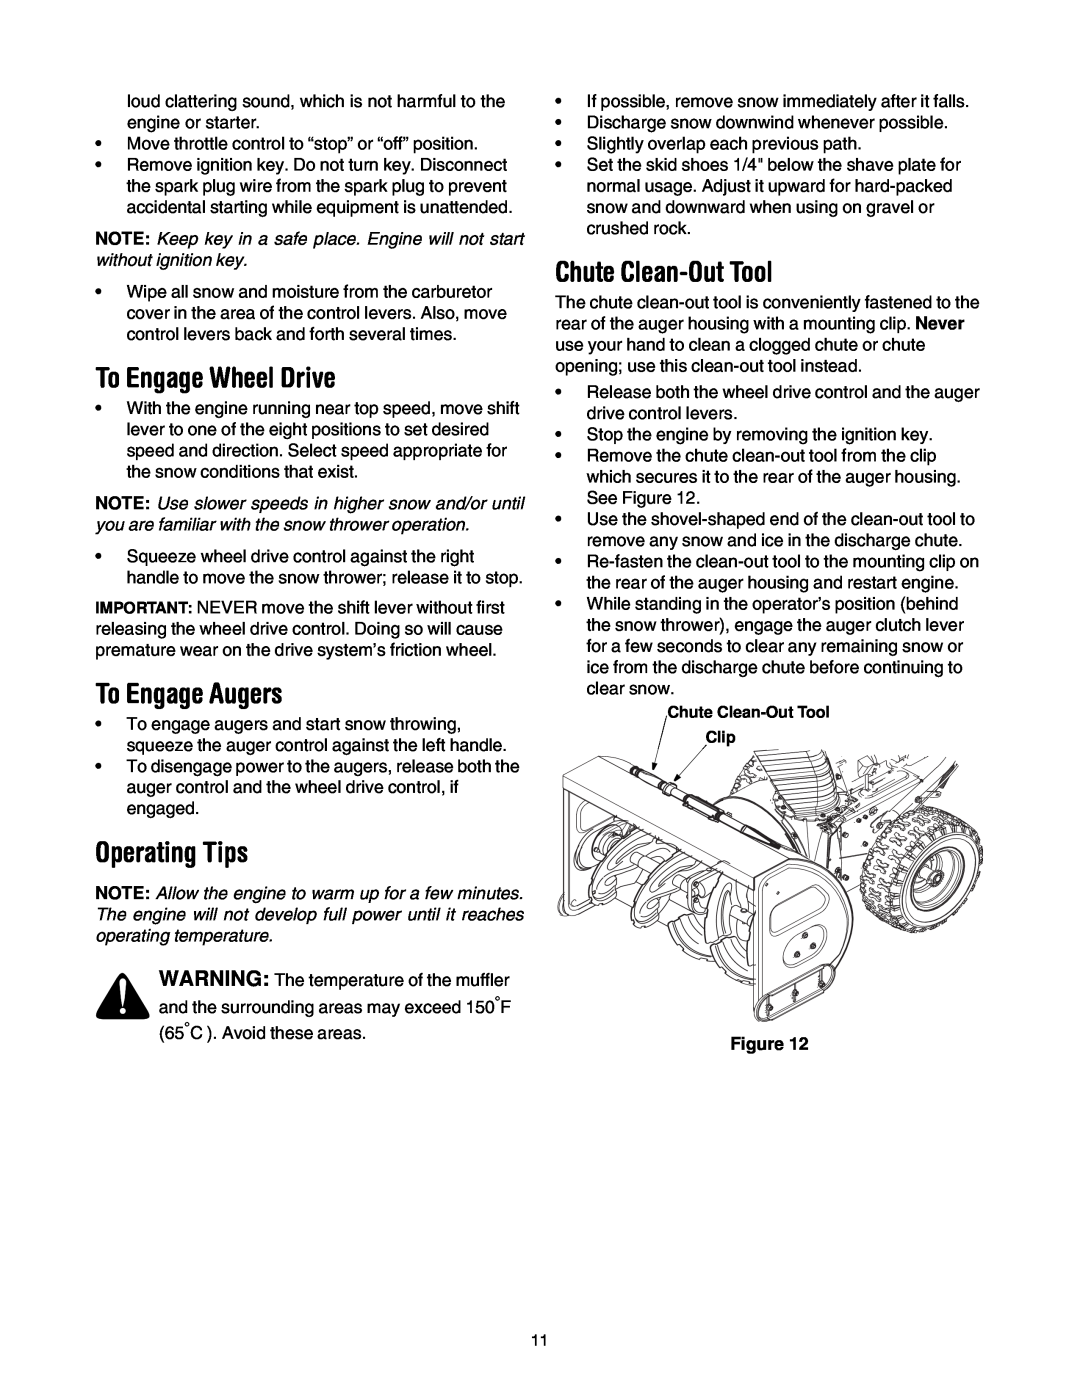 MTD OGST-3106 manual To Engage Wheel Drive, To Engage Augers, Operating Tips, Chute Clean-Out Tool 